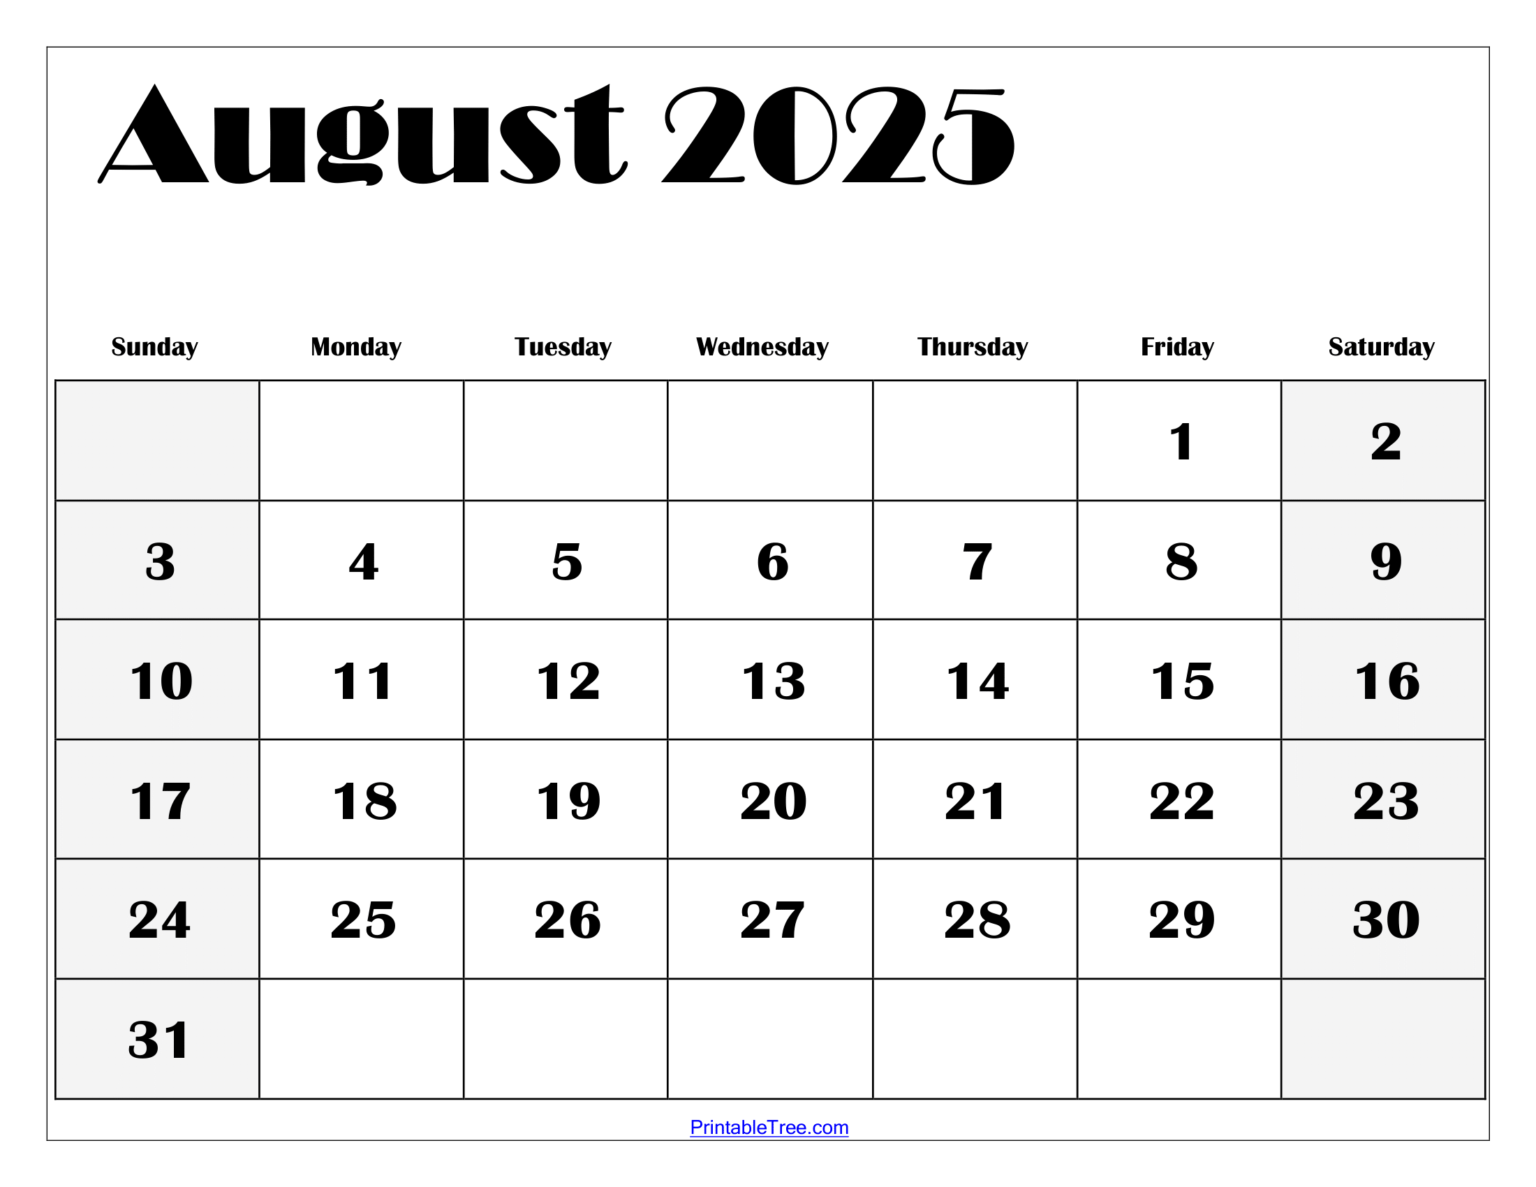 August 2025 Calendar Printable PDF Template with Holidays